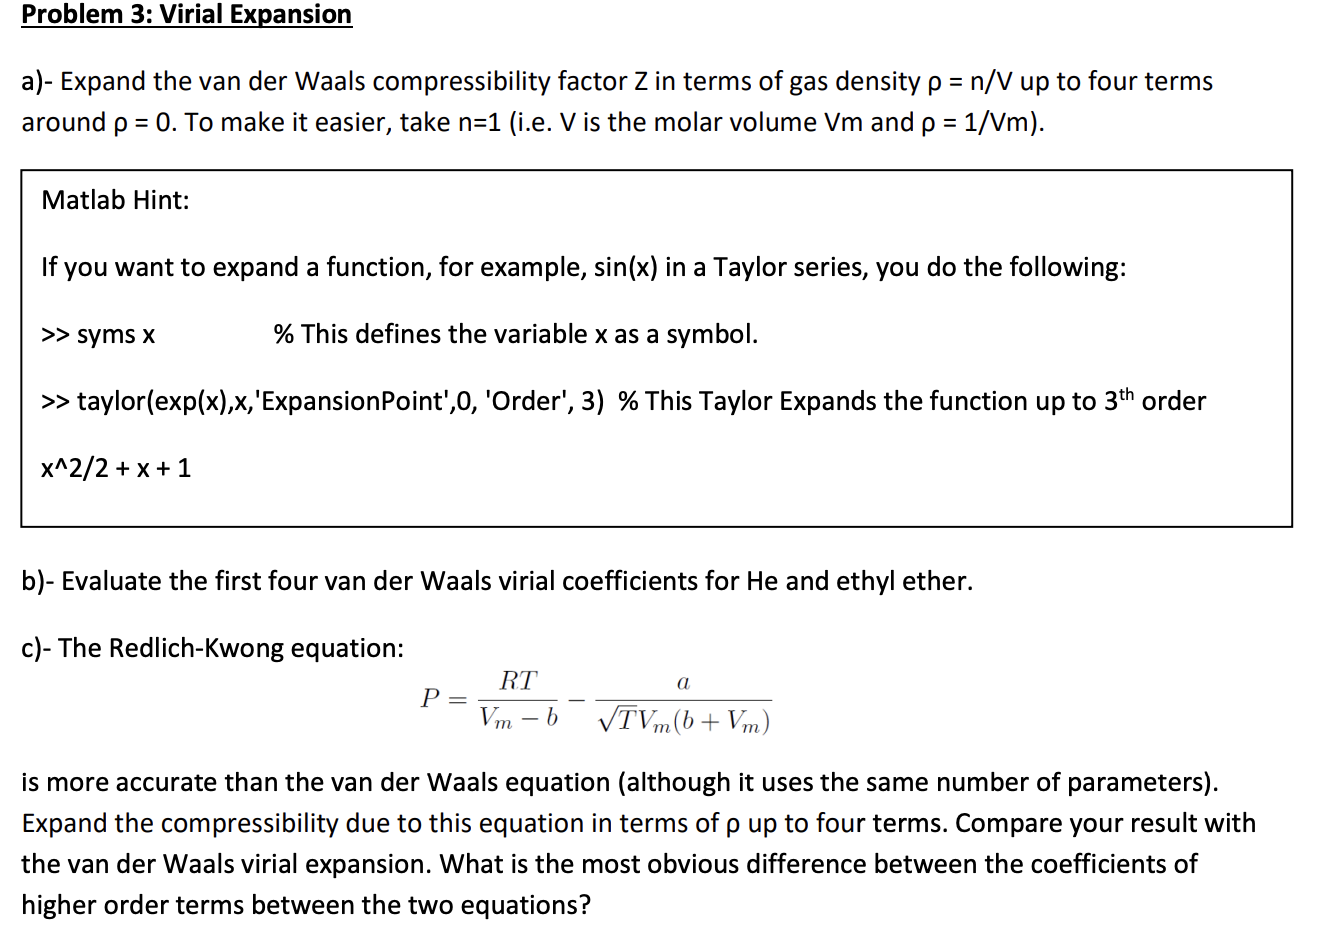 Welcome to Chem Zipper.com: The compressibility factor for 1 mole of  a van der Waals gas at 0oC and 100 atm pressure is found to be 0.5.  Assuming that the volume of